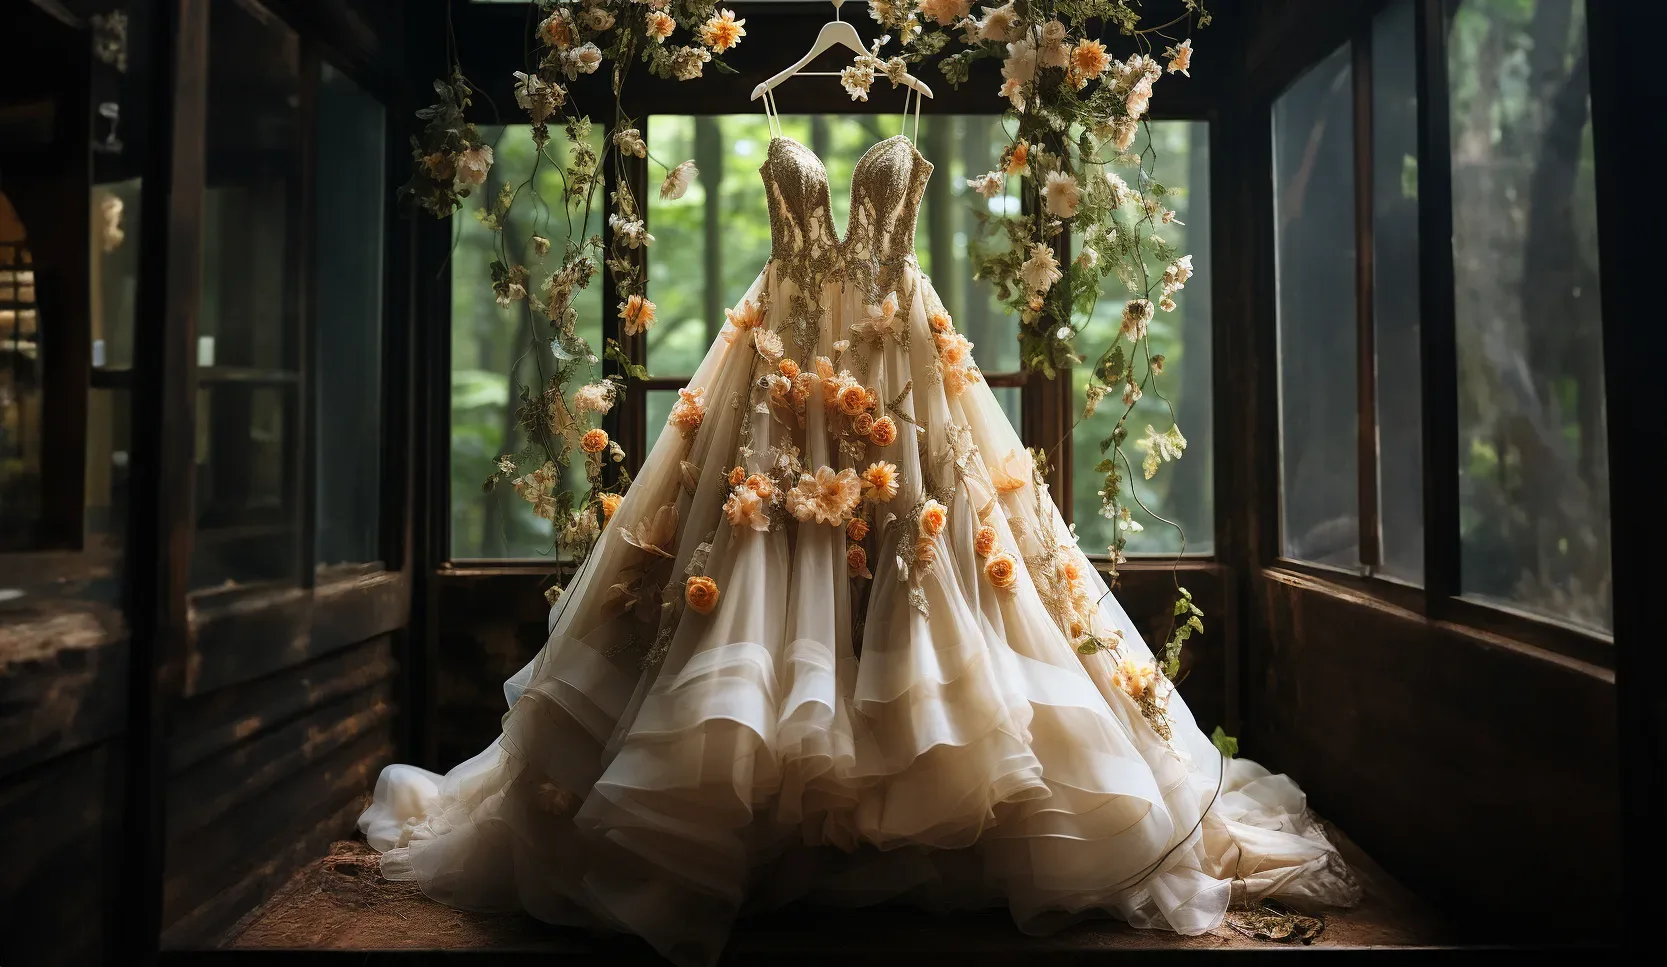 A wedding dress hangs in a room with flowers. Eco-Friendly Wedding